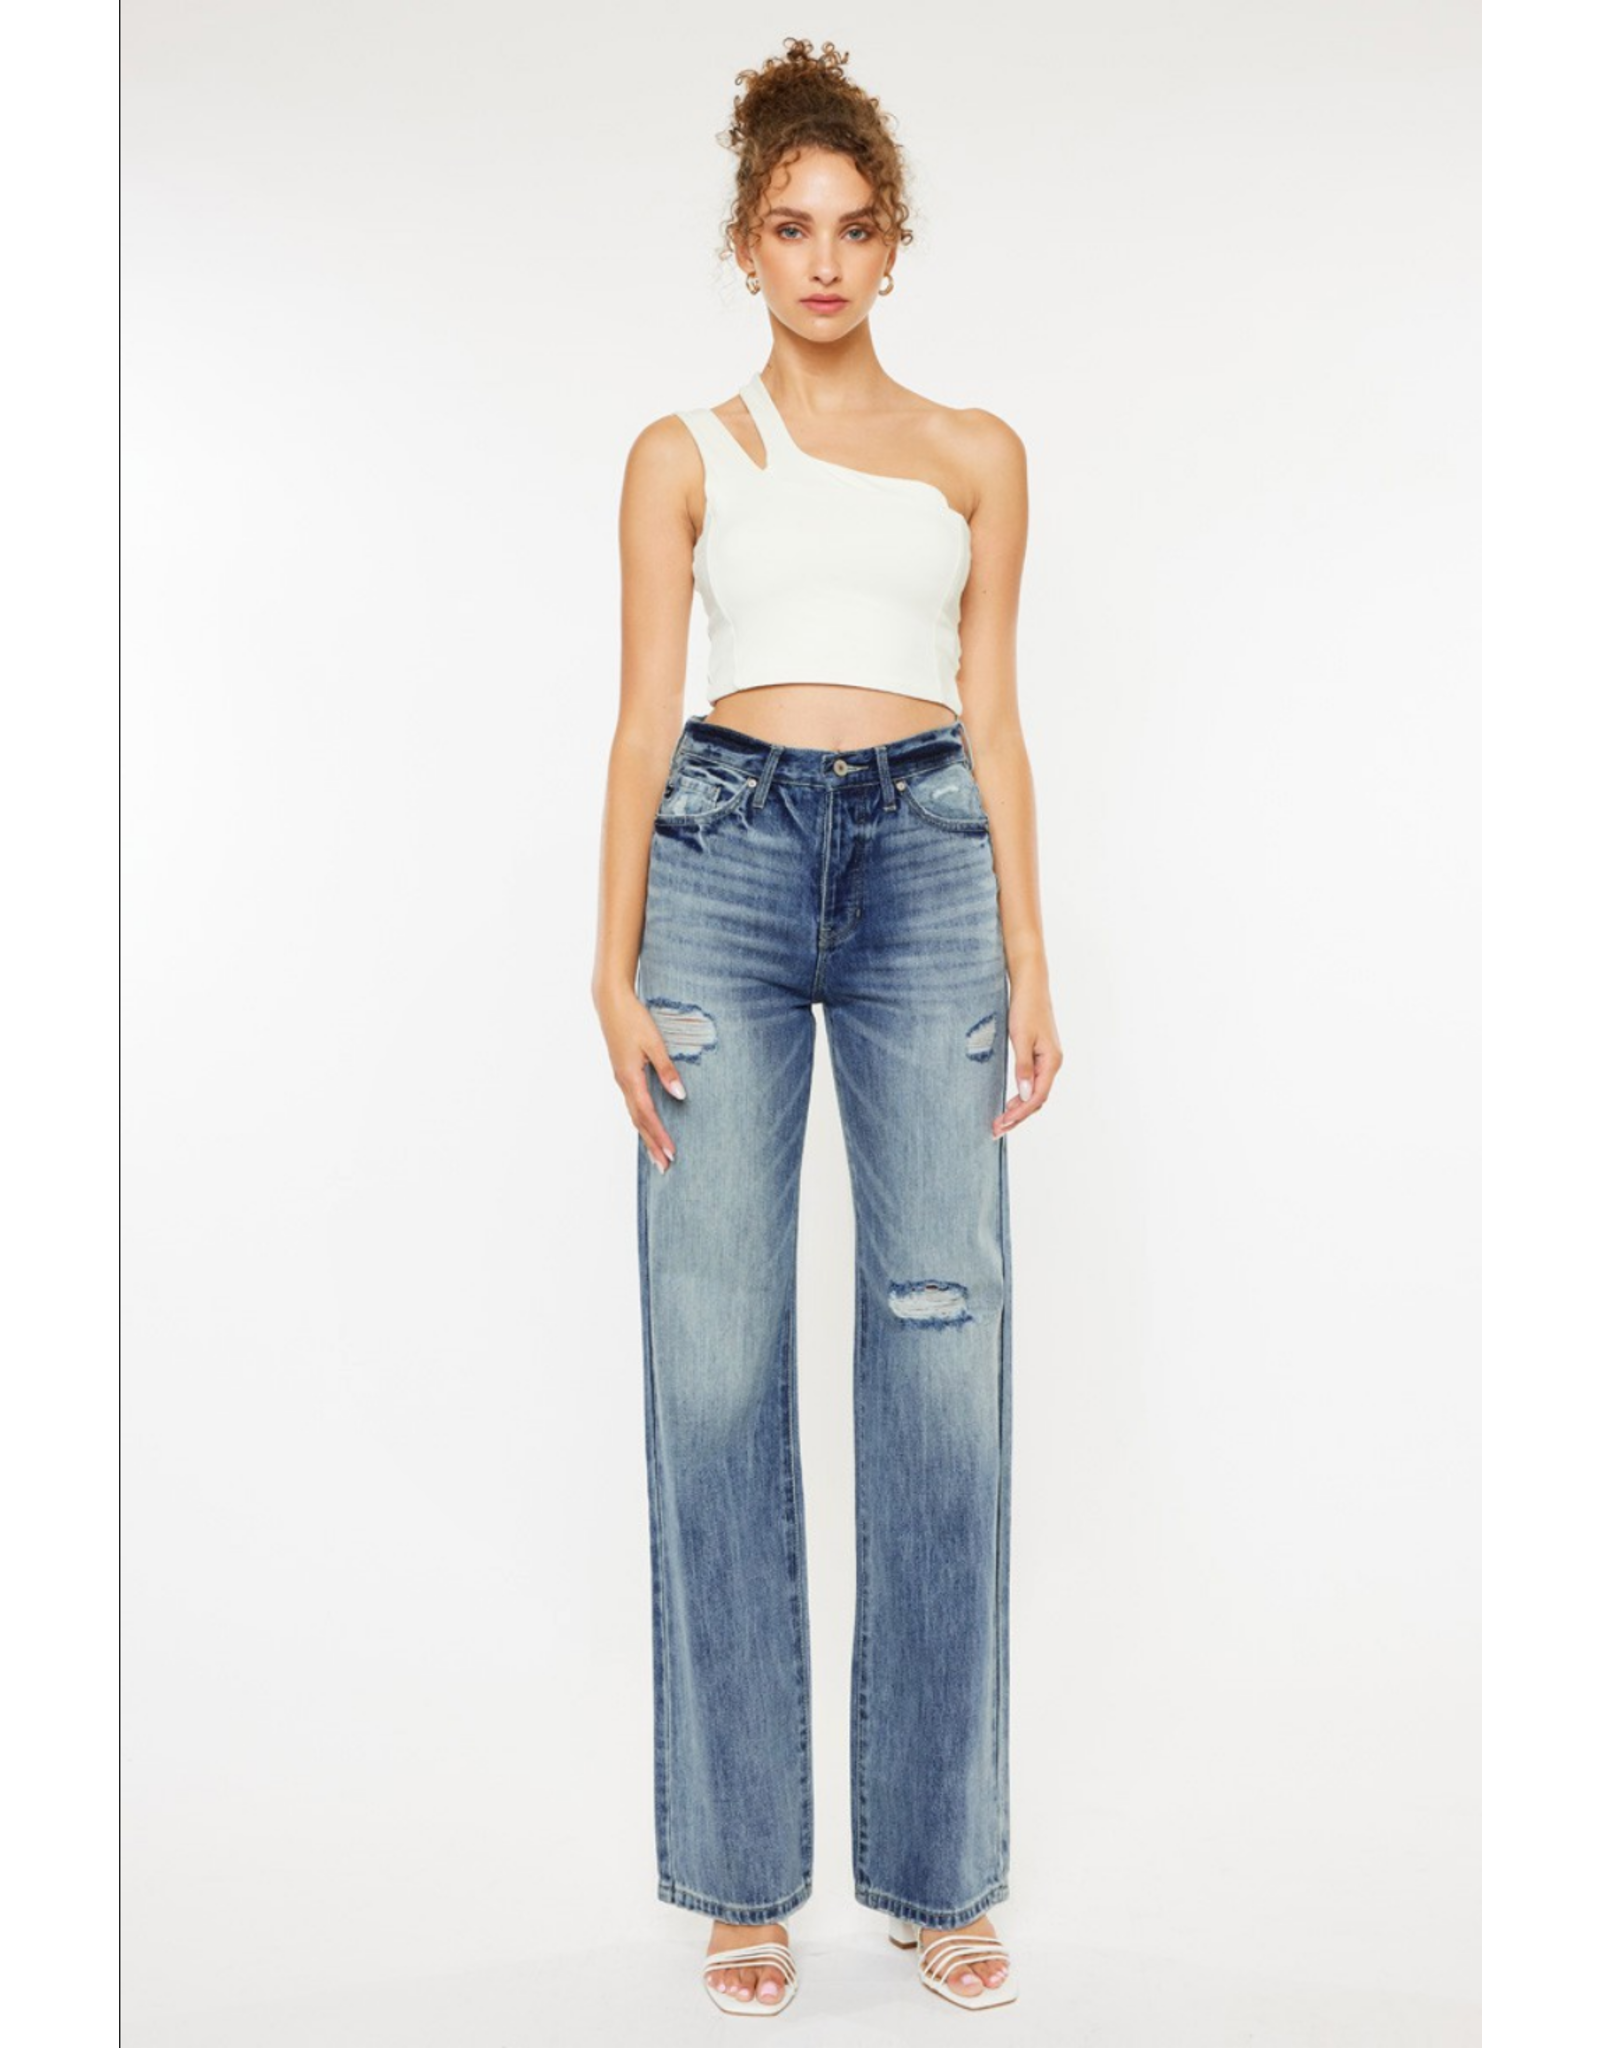 Kancan 90's Ultra High Rise Flare Jeans